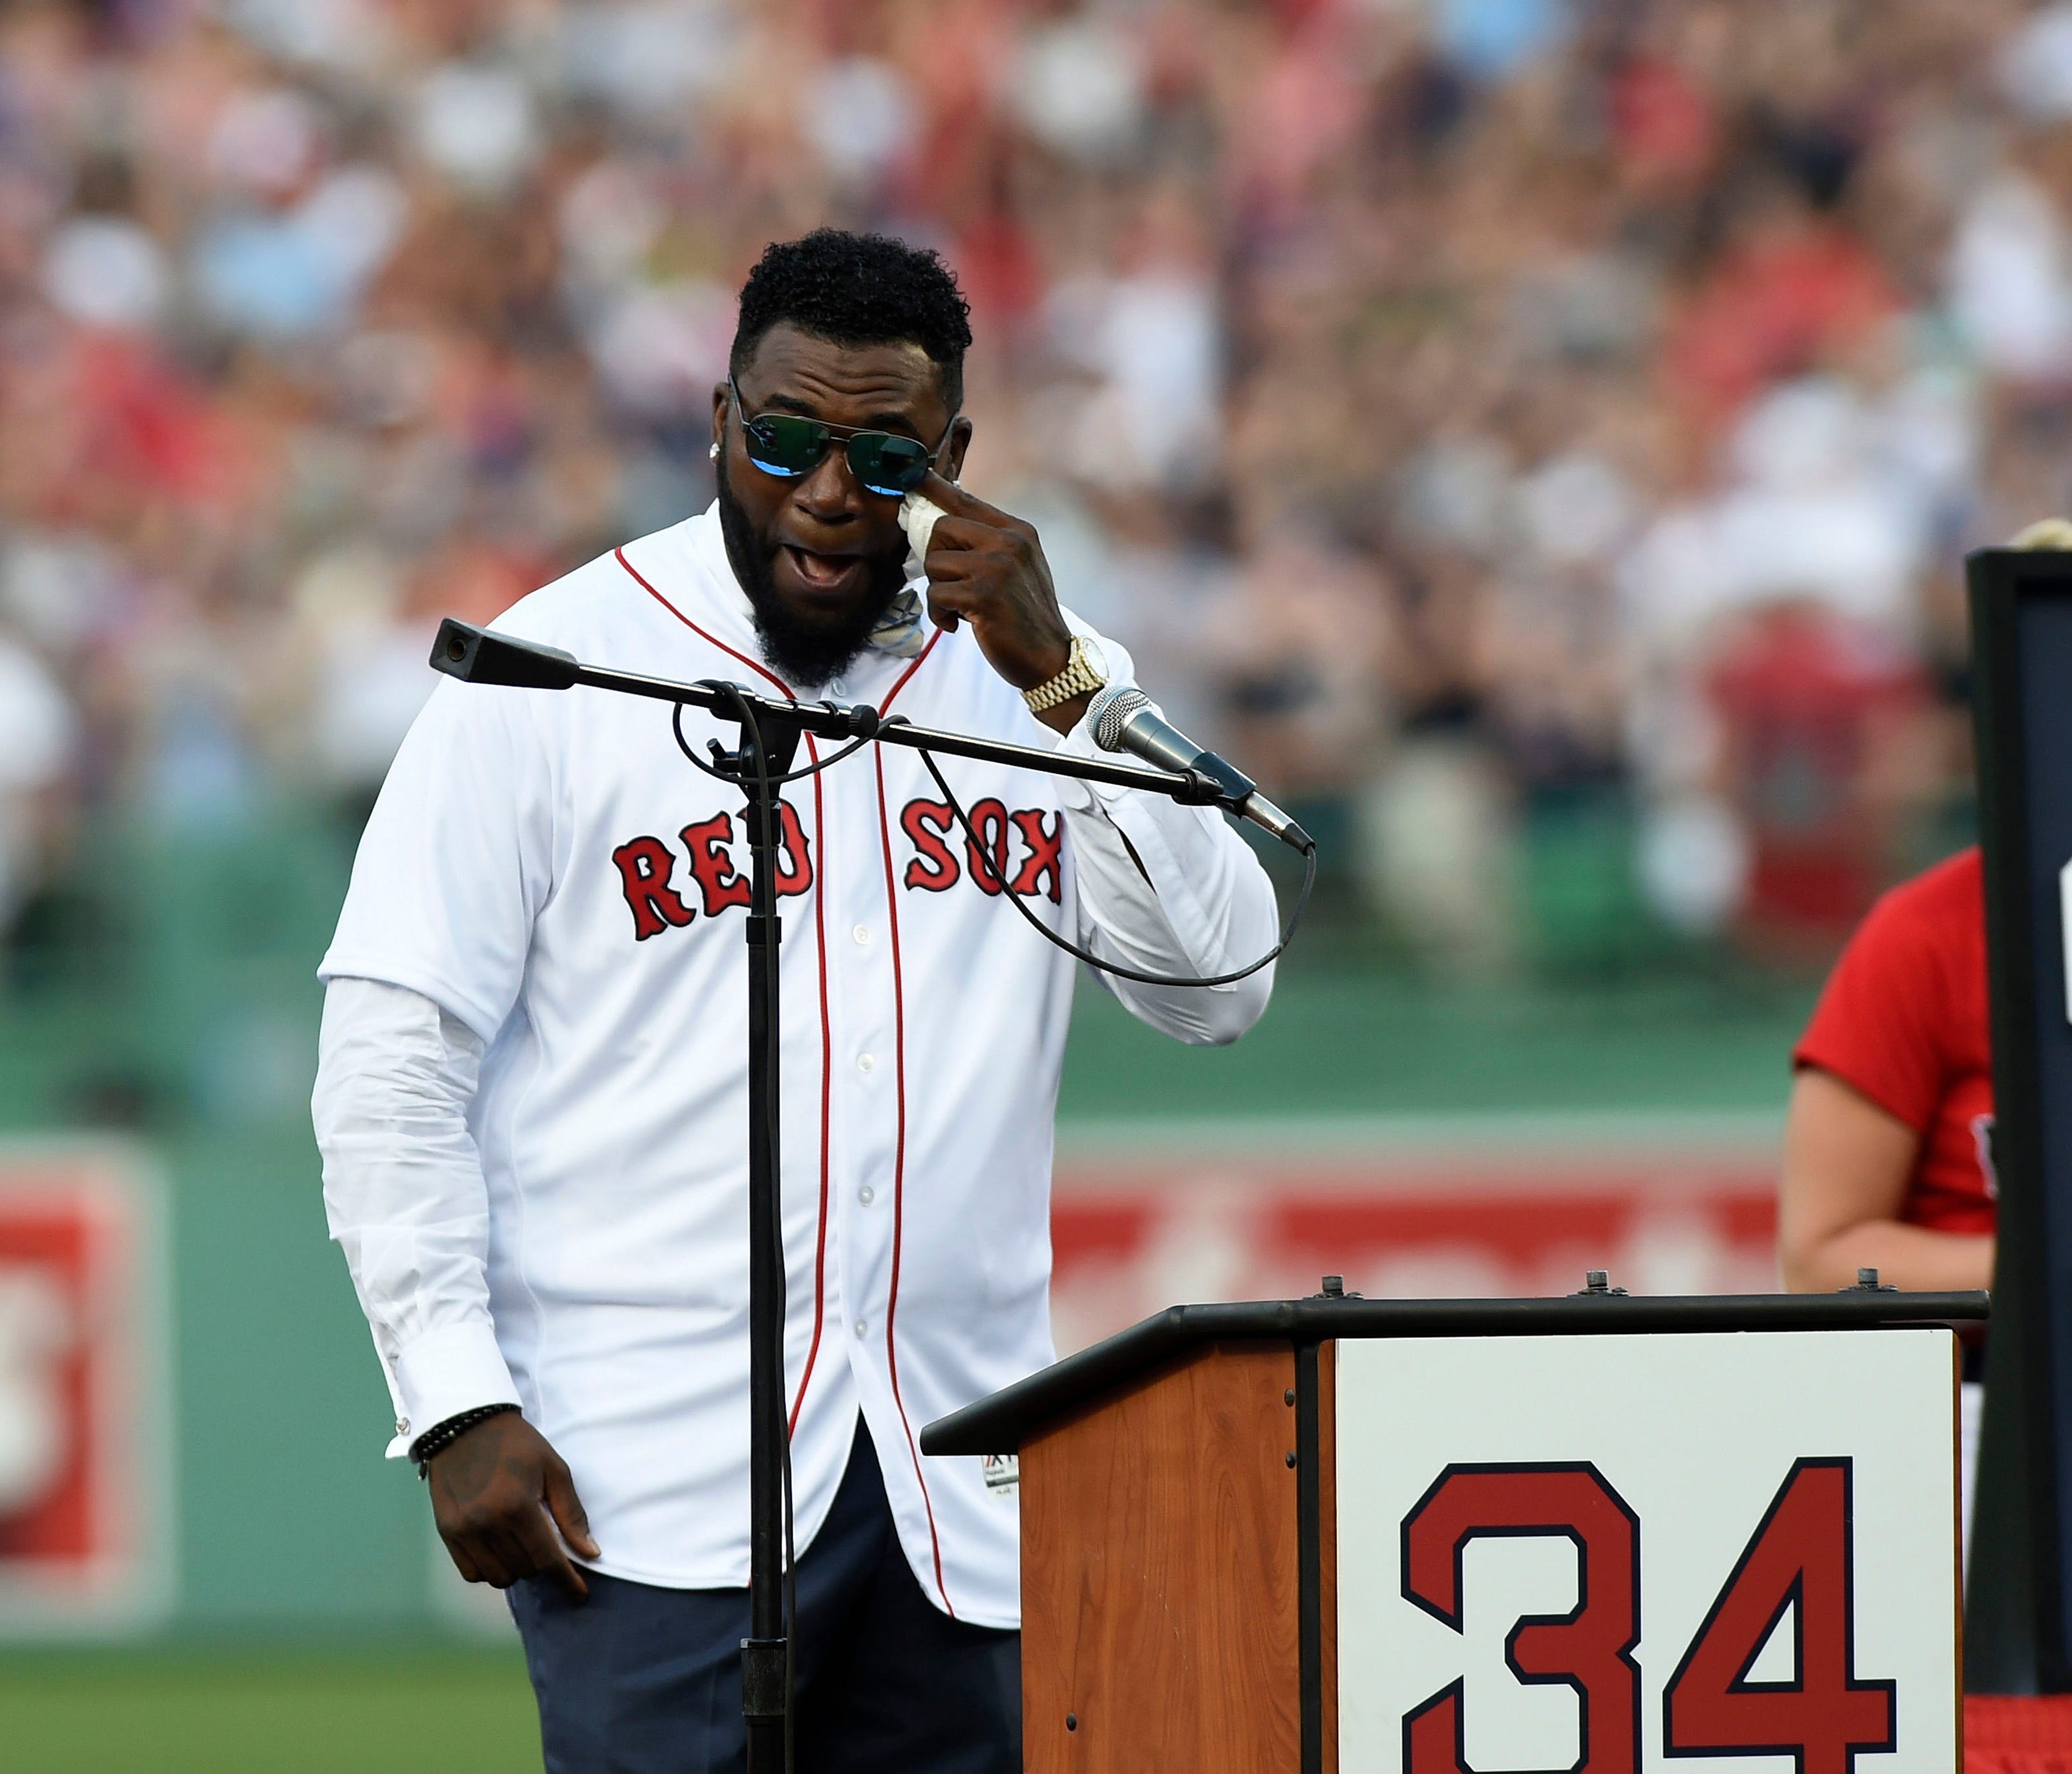 Jun 23, 2017; Boston, MA, USA; Boston Red Sox former designated hitter David Ortiz wipes tears during ceremonies in his honor before a game against the Los Angeles Angels at Fenway Park. Mandatory Credit: Bob DeChiara-USA TODAY Sports ORG XMIT: USATS